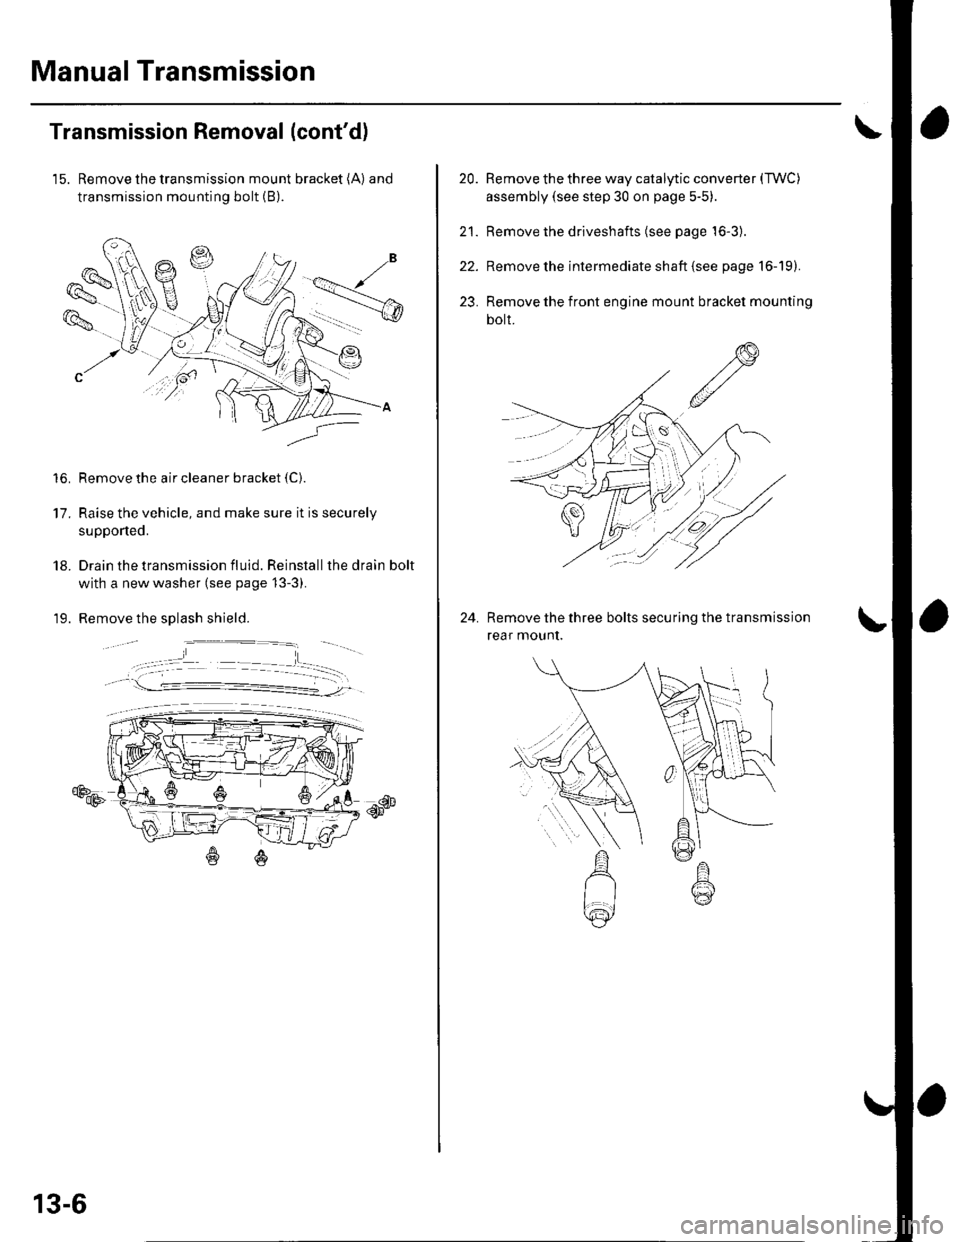 HONDA CIVIC 2003 7.G Owners Guide Manual Transmission
Transmission Removal (contd)
15. Remove the transmission mount bracket (A) and
transmission mounting bolt (B).
Remove the air cleaner bracket {C).
Raise the vehicle, and make sure